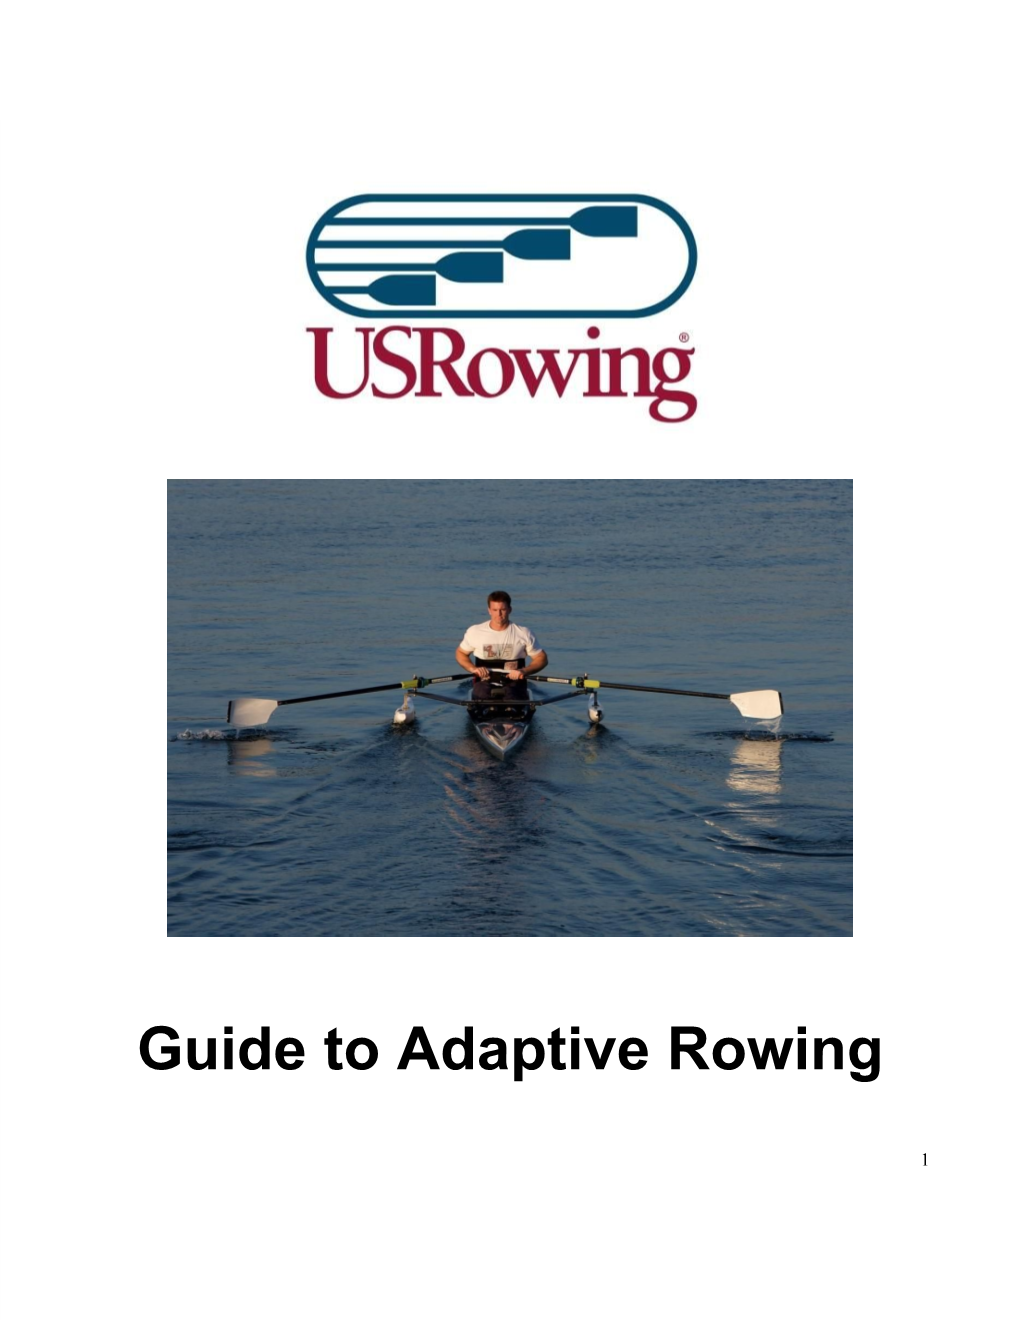 Usrowing Guide to Adaptive Rowing 2015